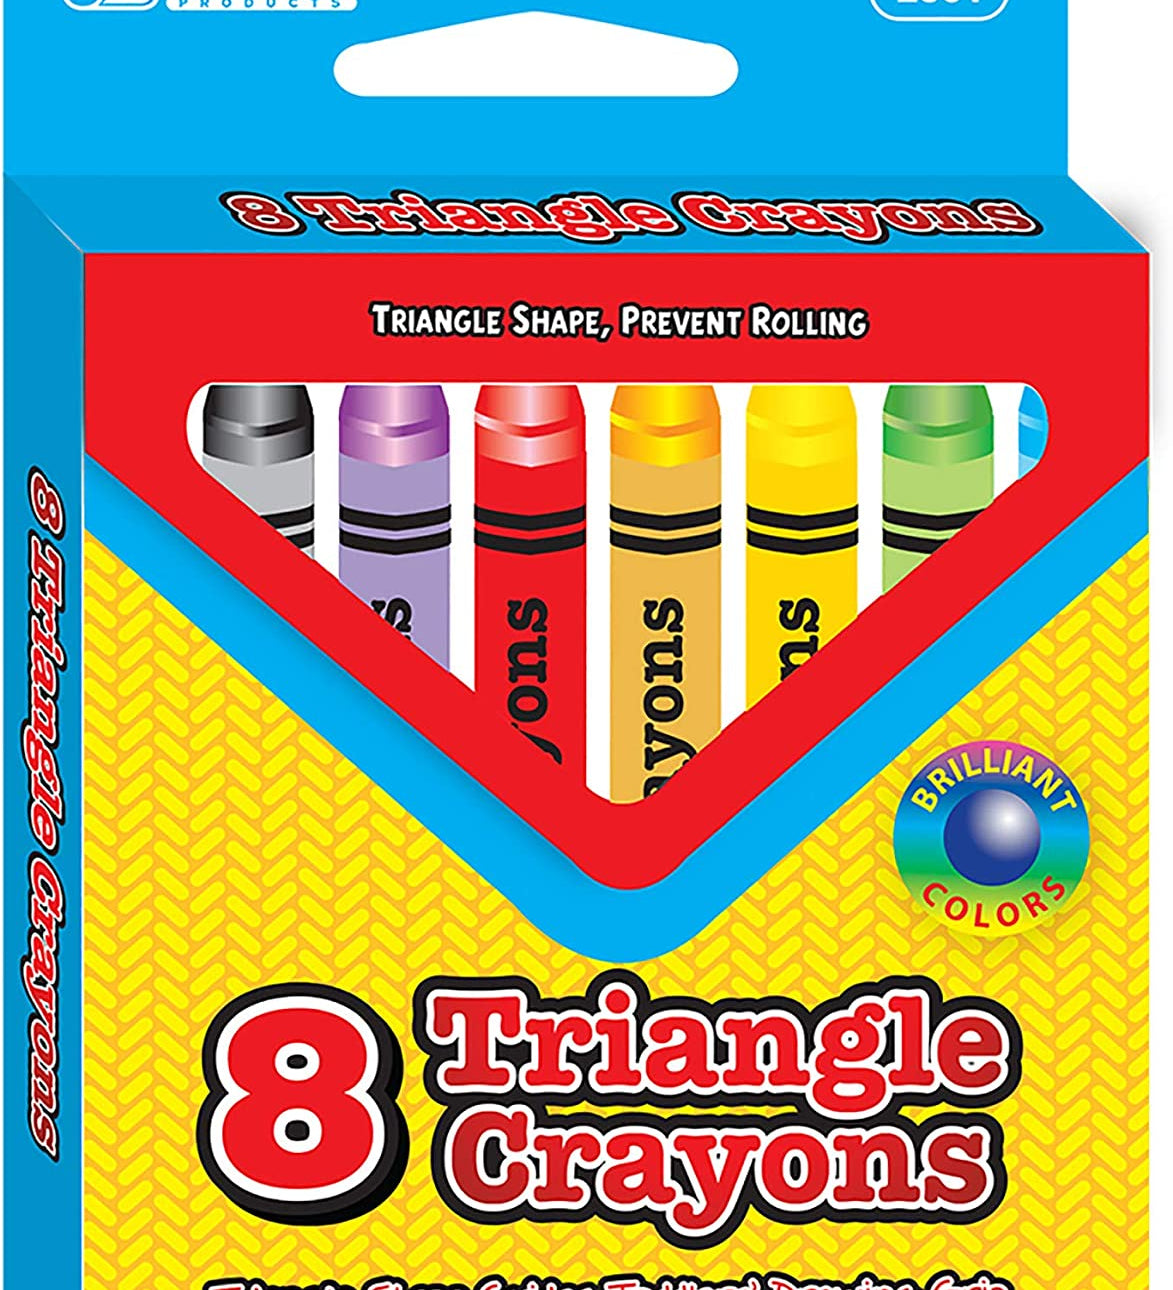 Premium Color Super Jumbo Crayons Coloring Set8-Count24-Pack - G8 Central